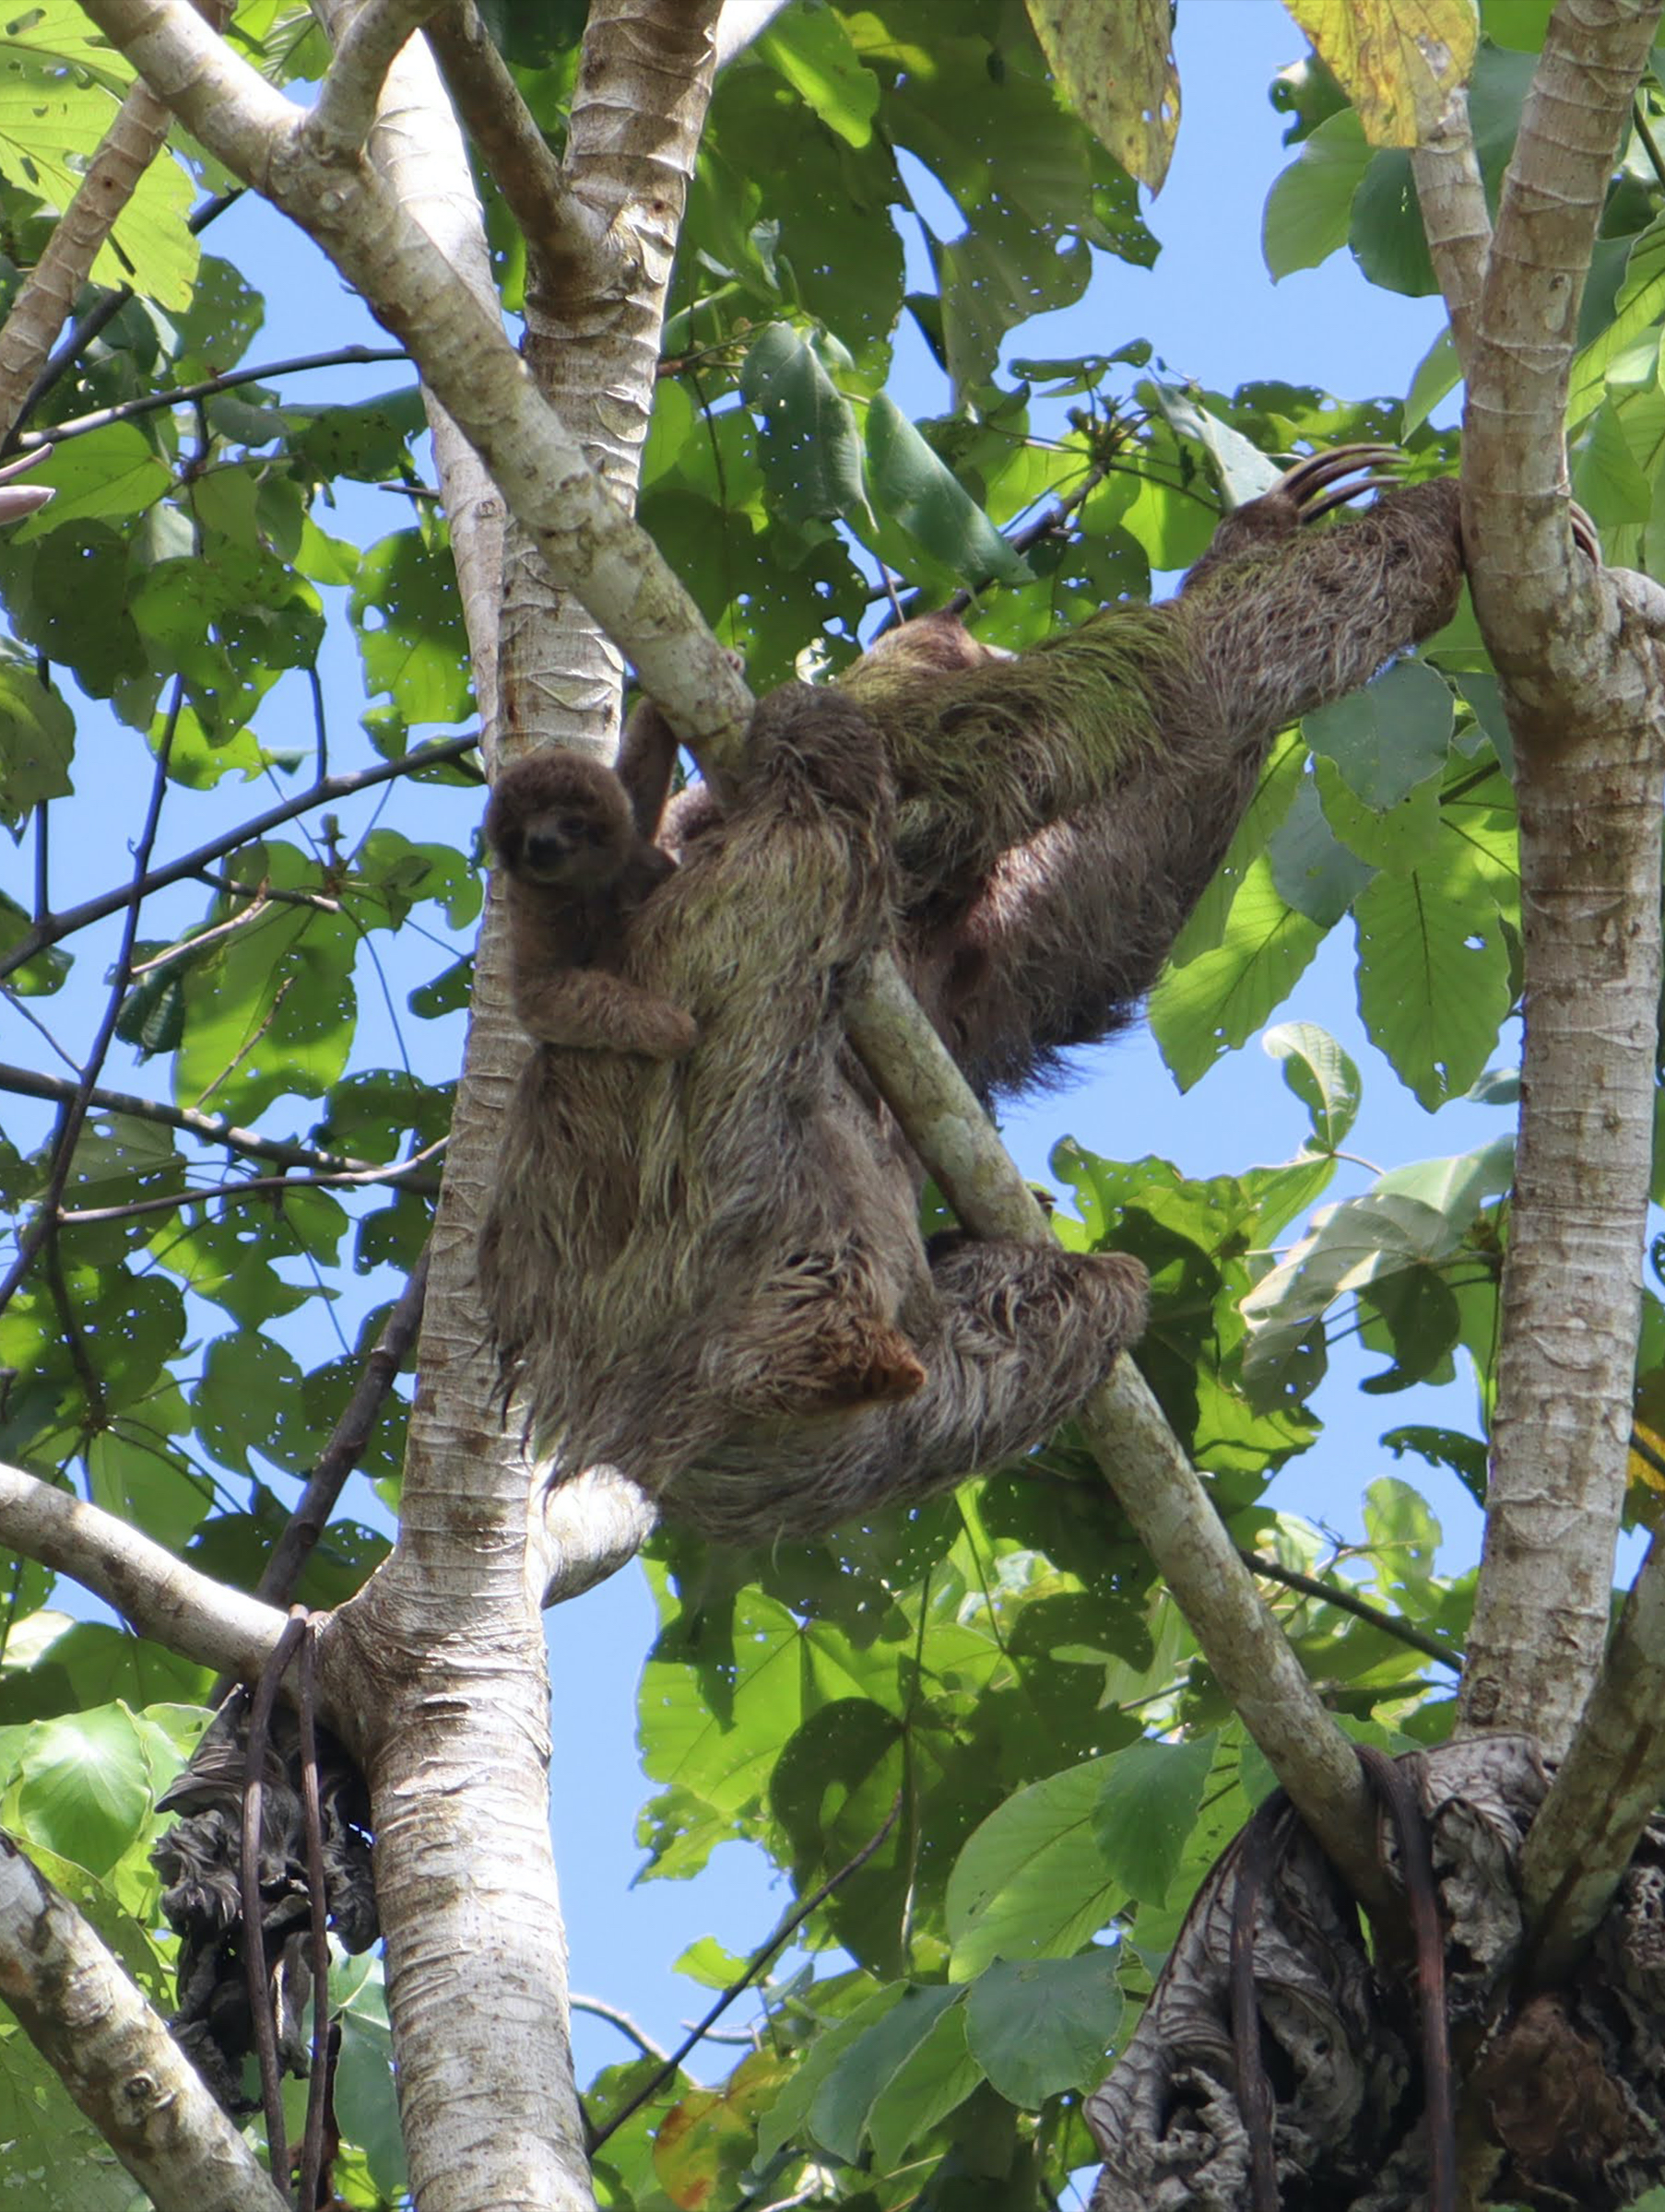 A family of tree sloths in a tree